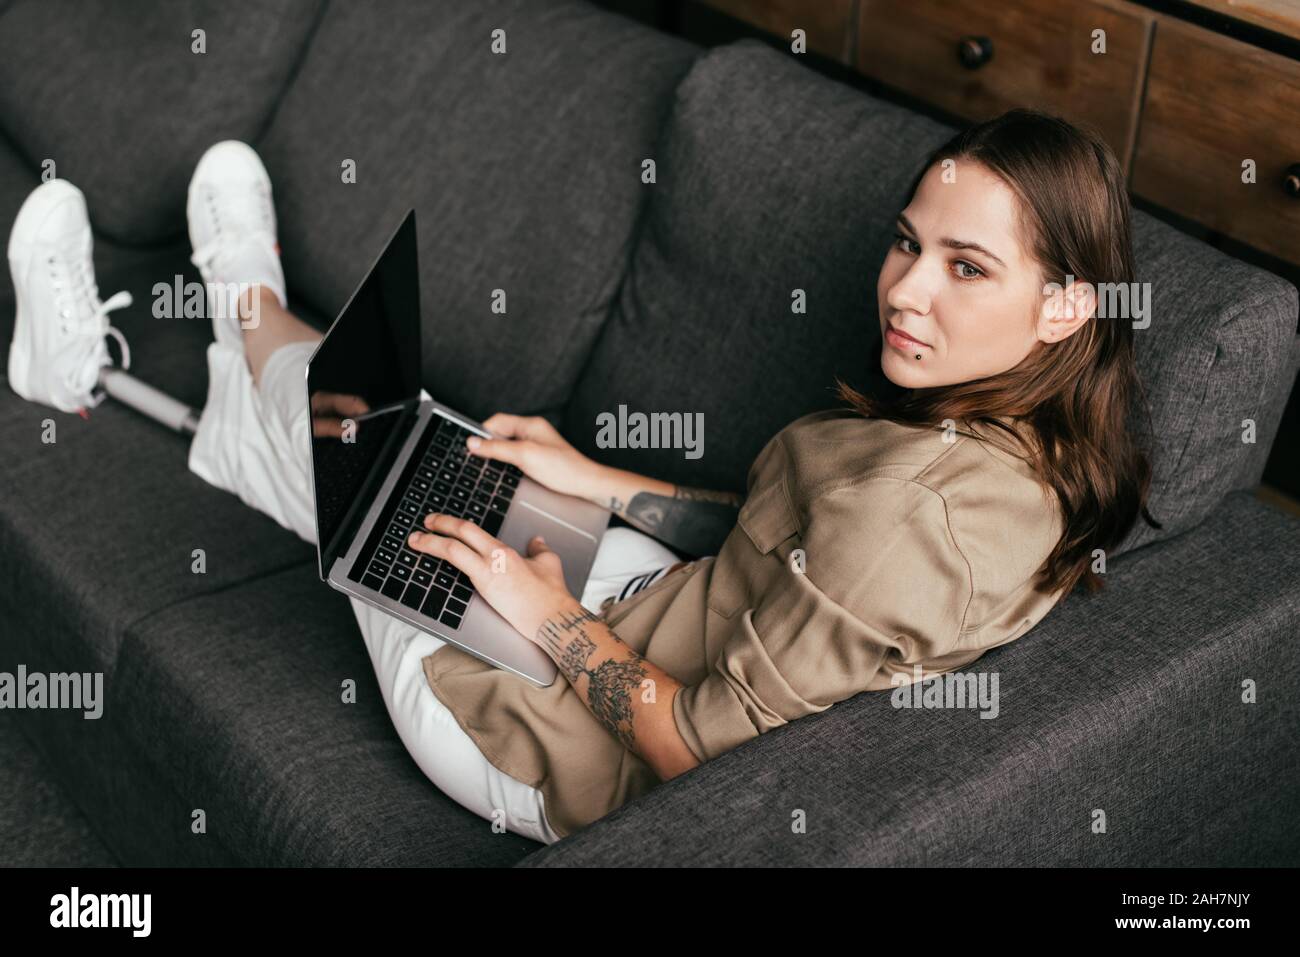 Beautiful girl with prosthetic leg using laptop with blank screen